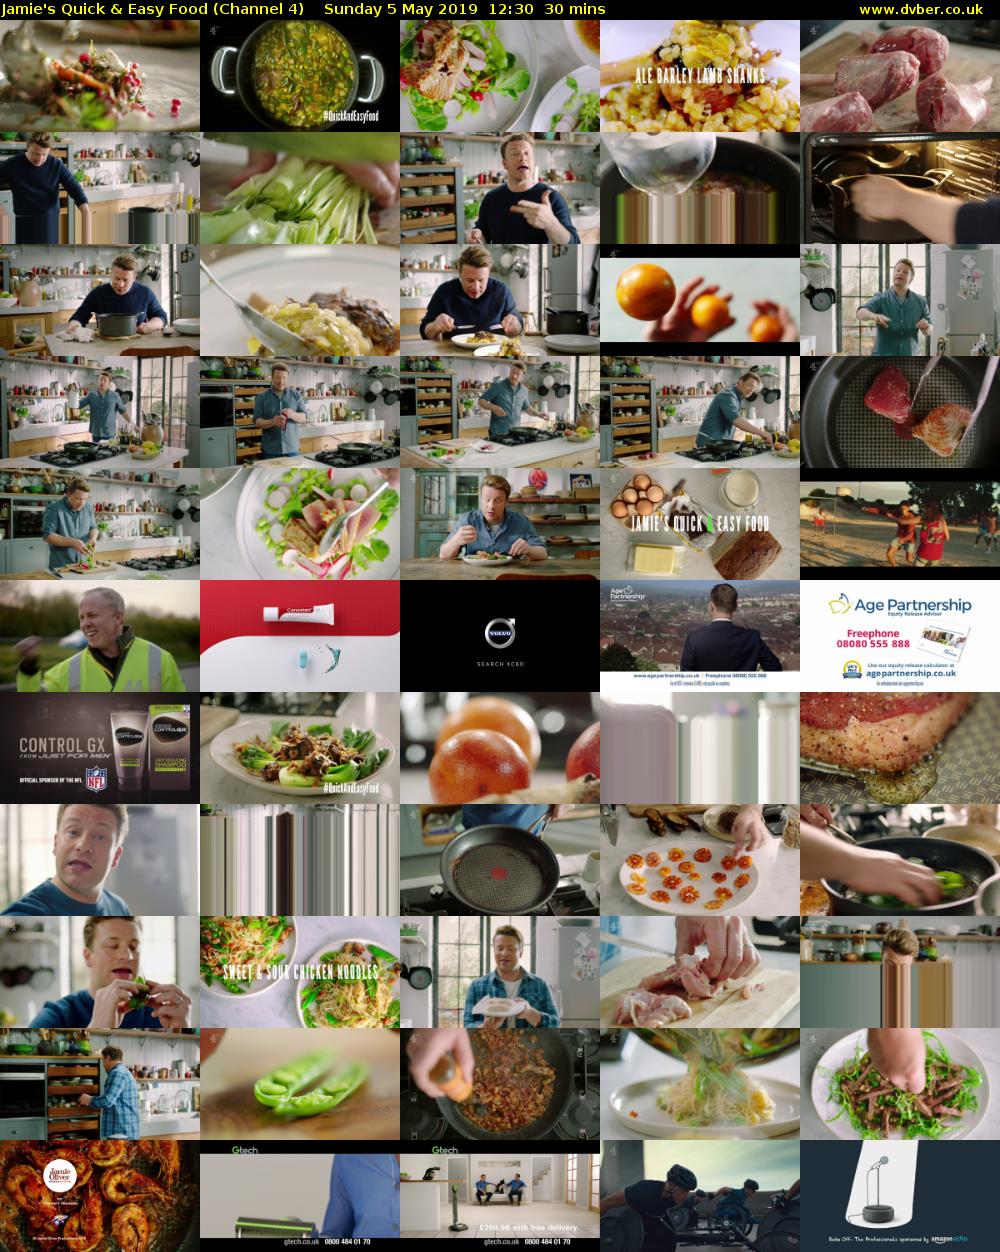 Jamie's Quick & Easy Food (Channel 4) Sunday 5 May 2019 12:30 - 13:00